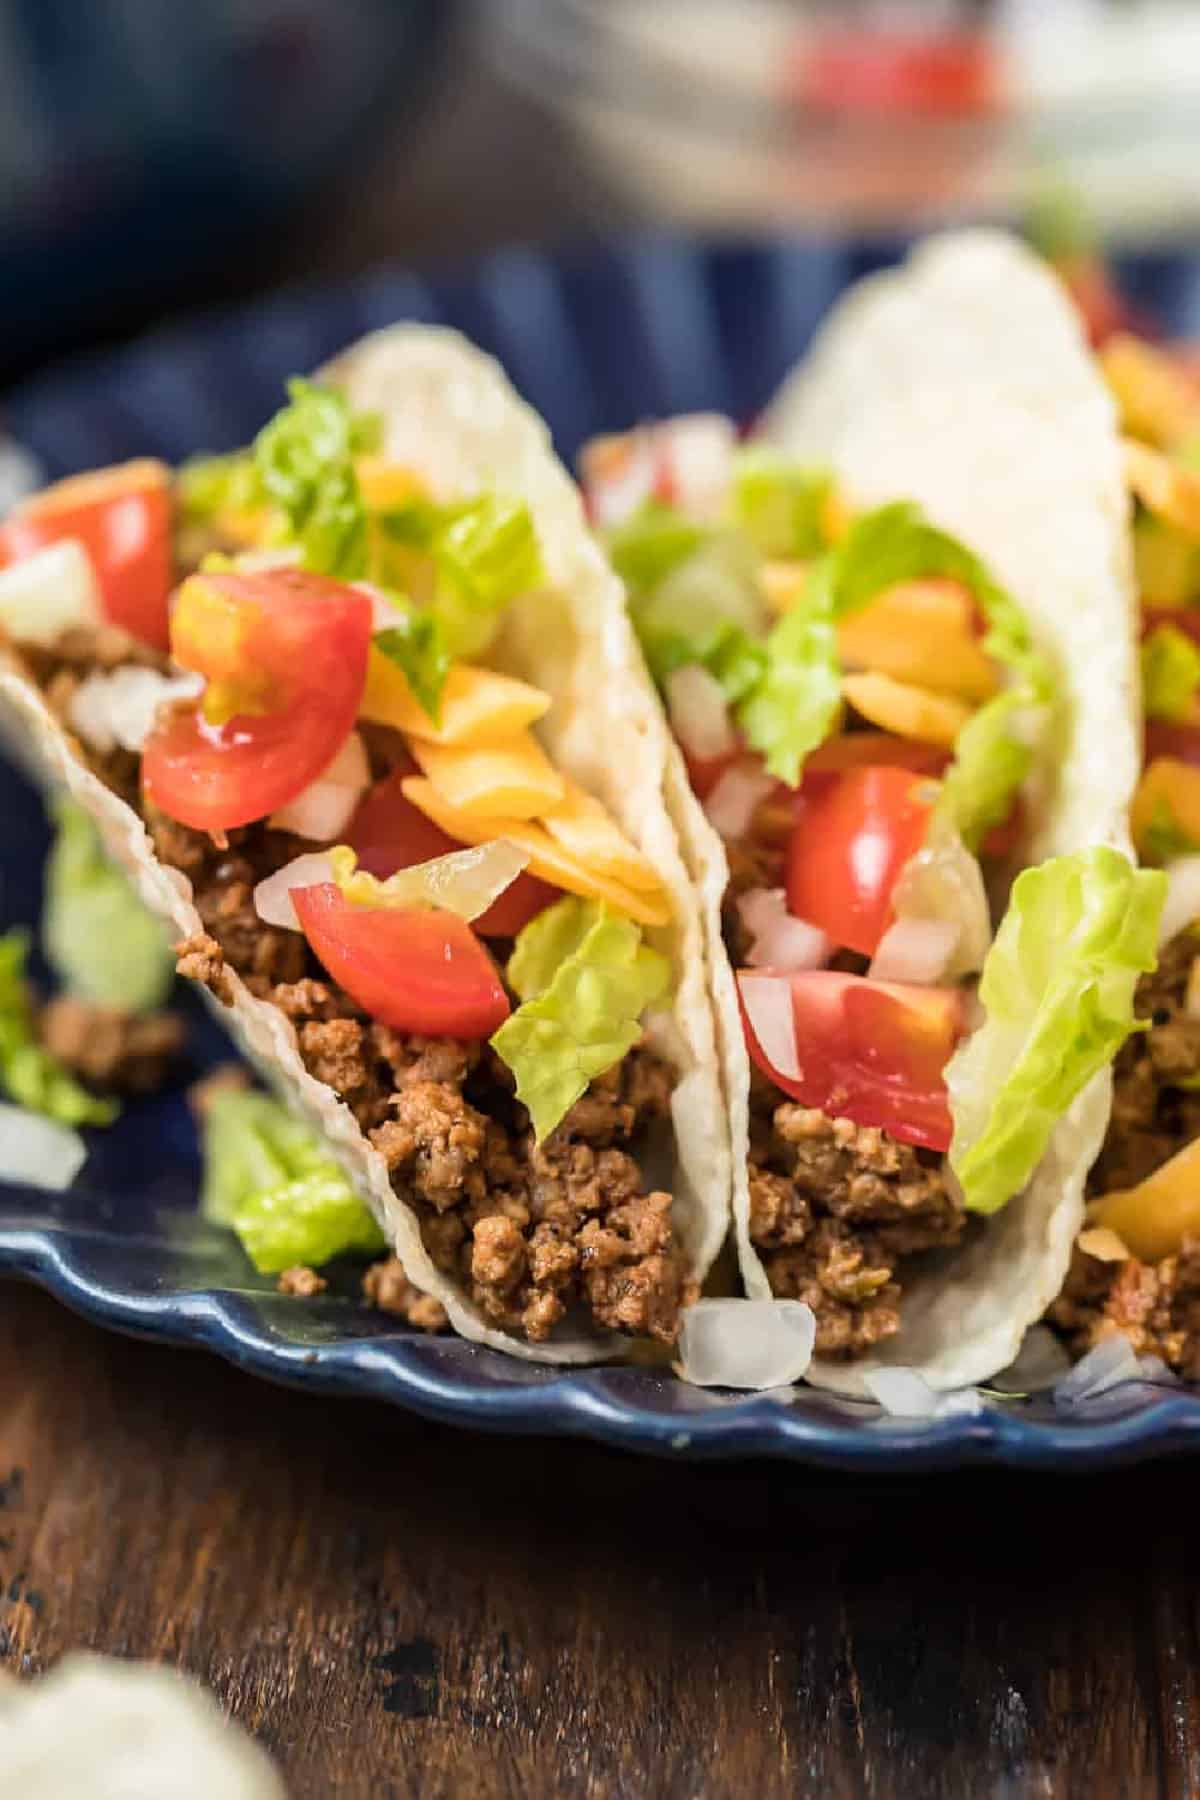 A plate of tacos with crockpot taco meat and vegetables.